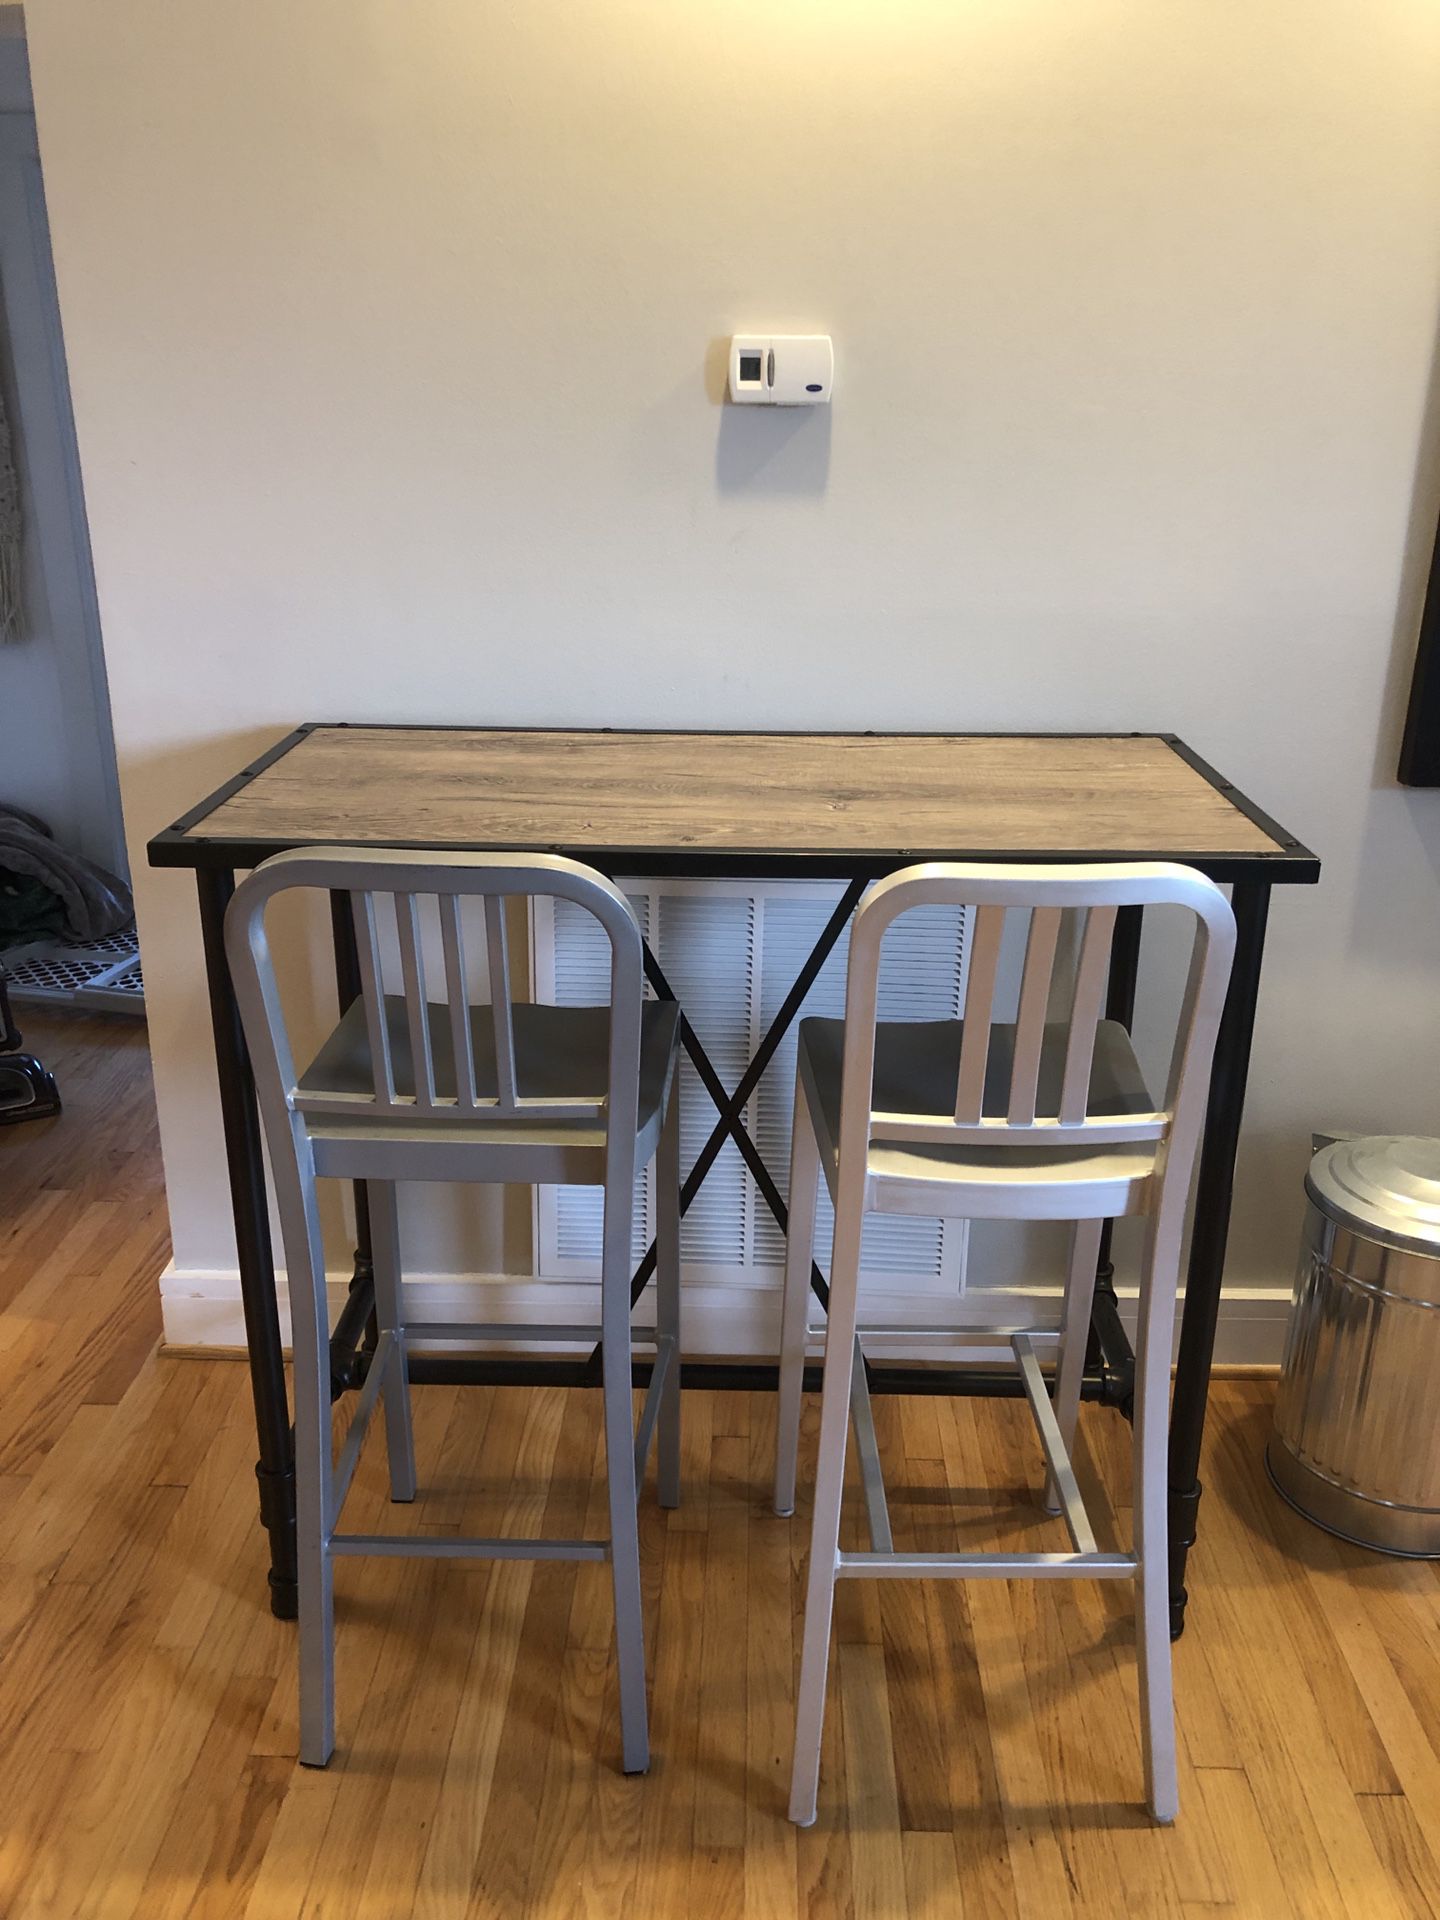 High Top table with stools